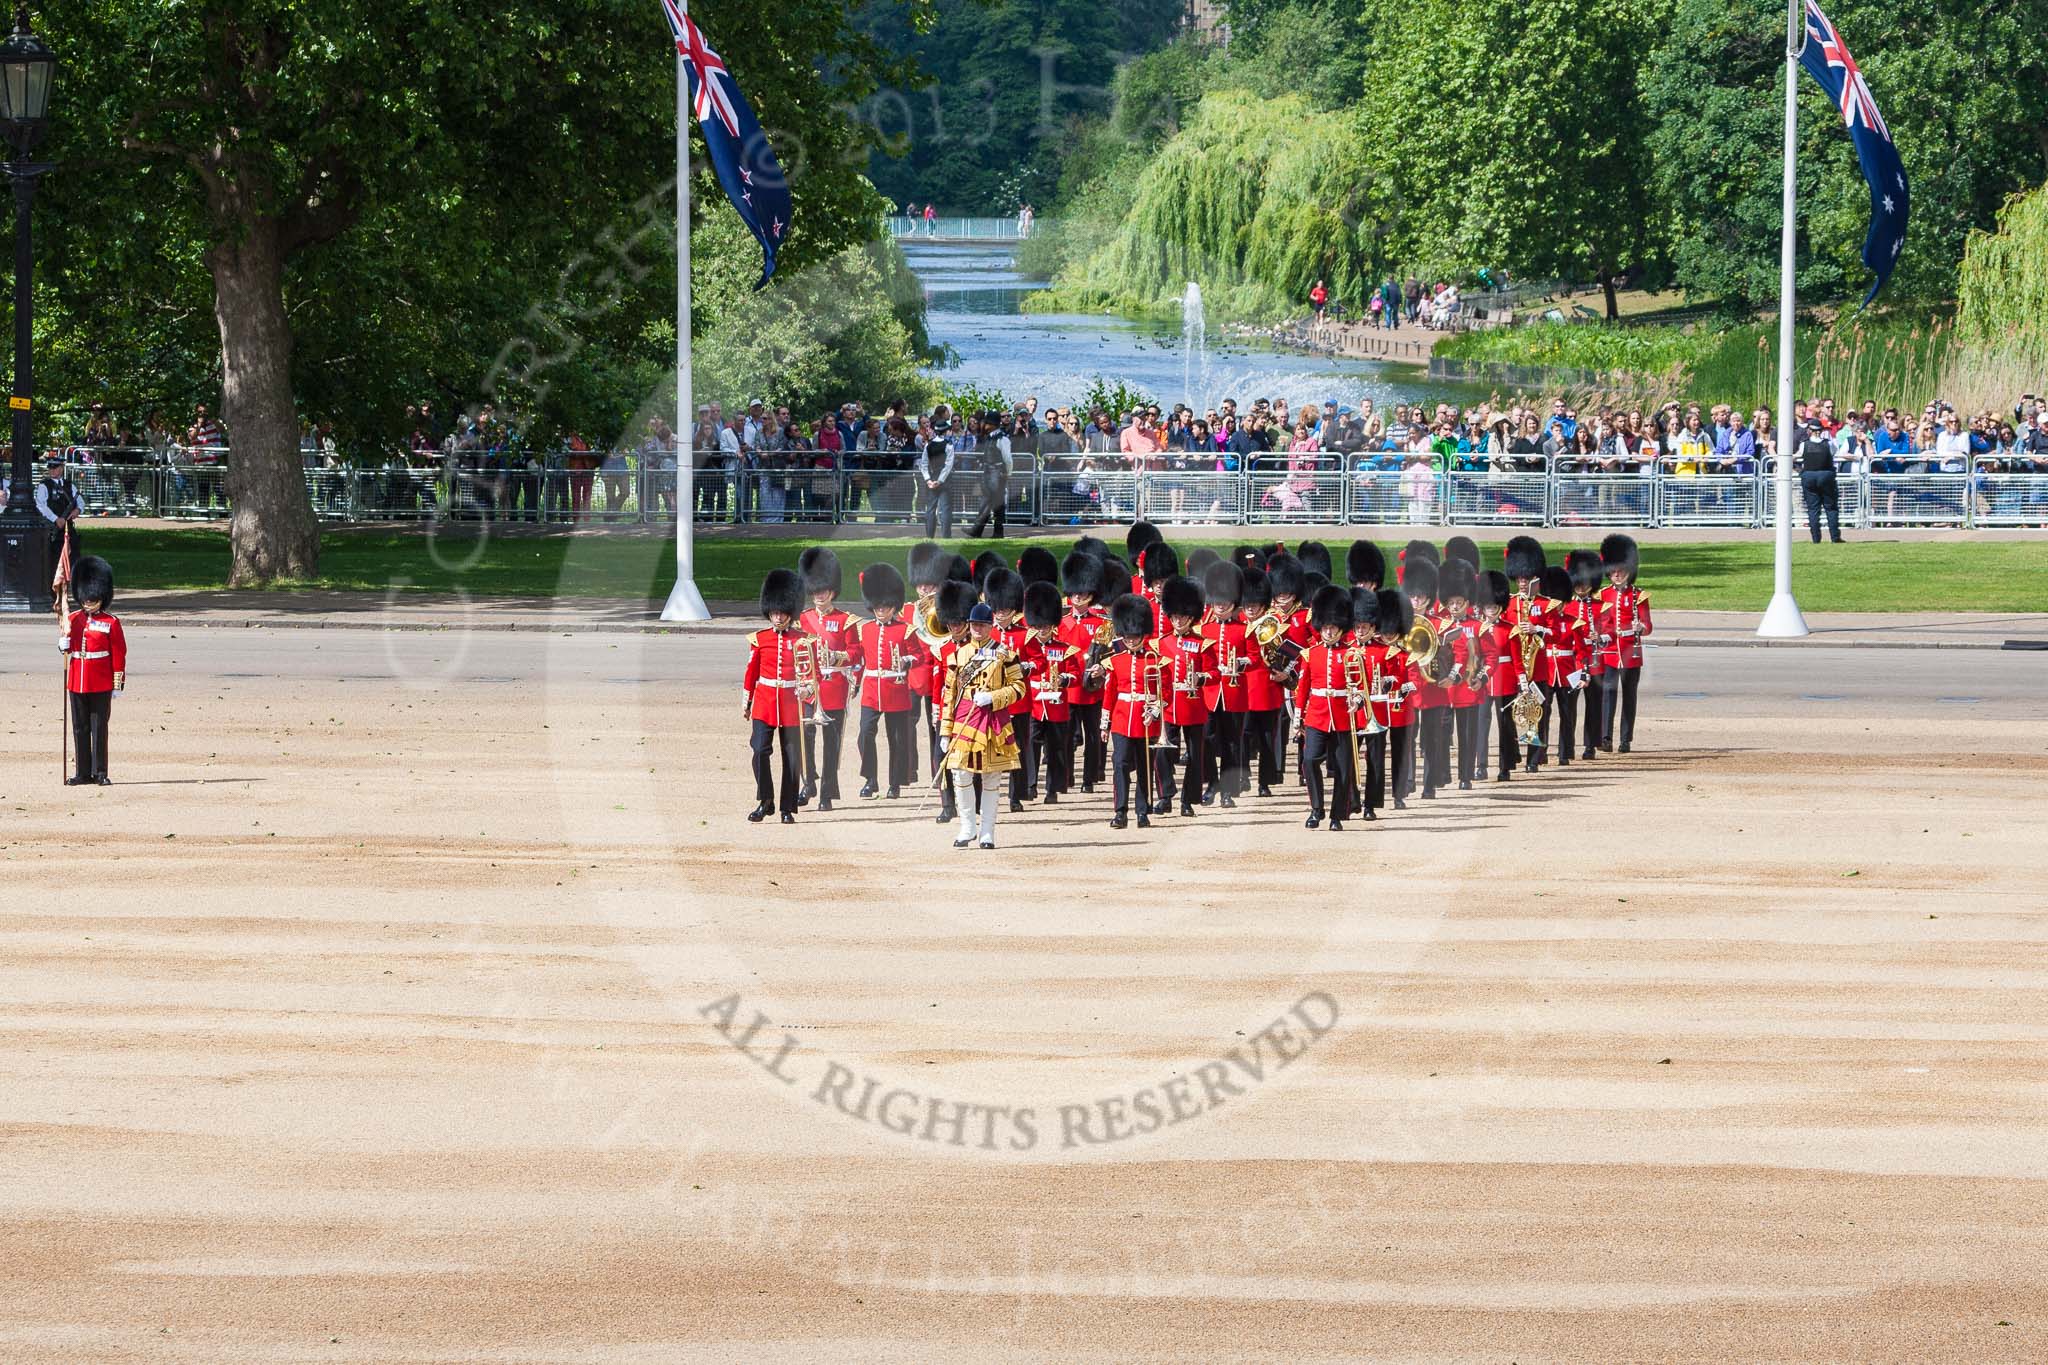 The Colonel's Review 2015.
Horse Guards Parade, Westminster,
London,

United Kingdom,
on 06 June 2015 at 10:27, image #62